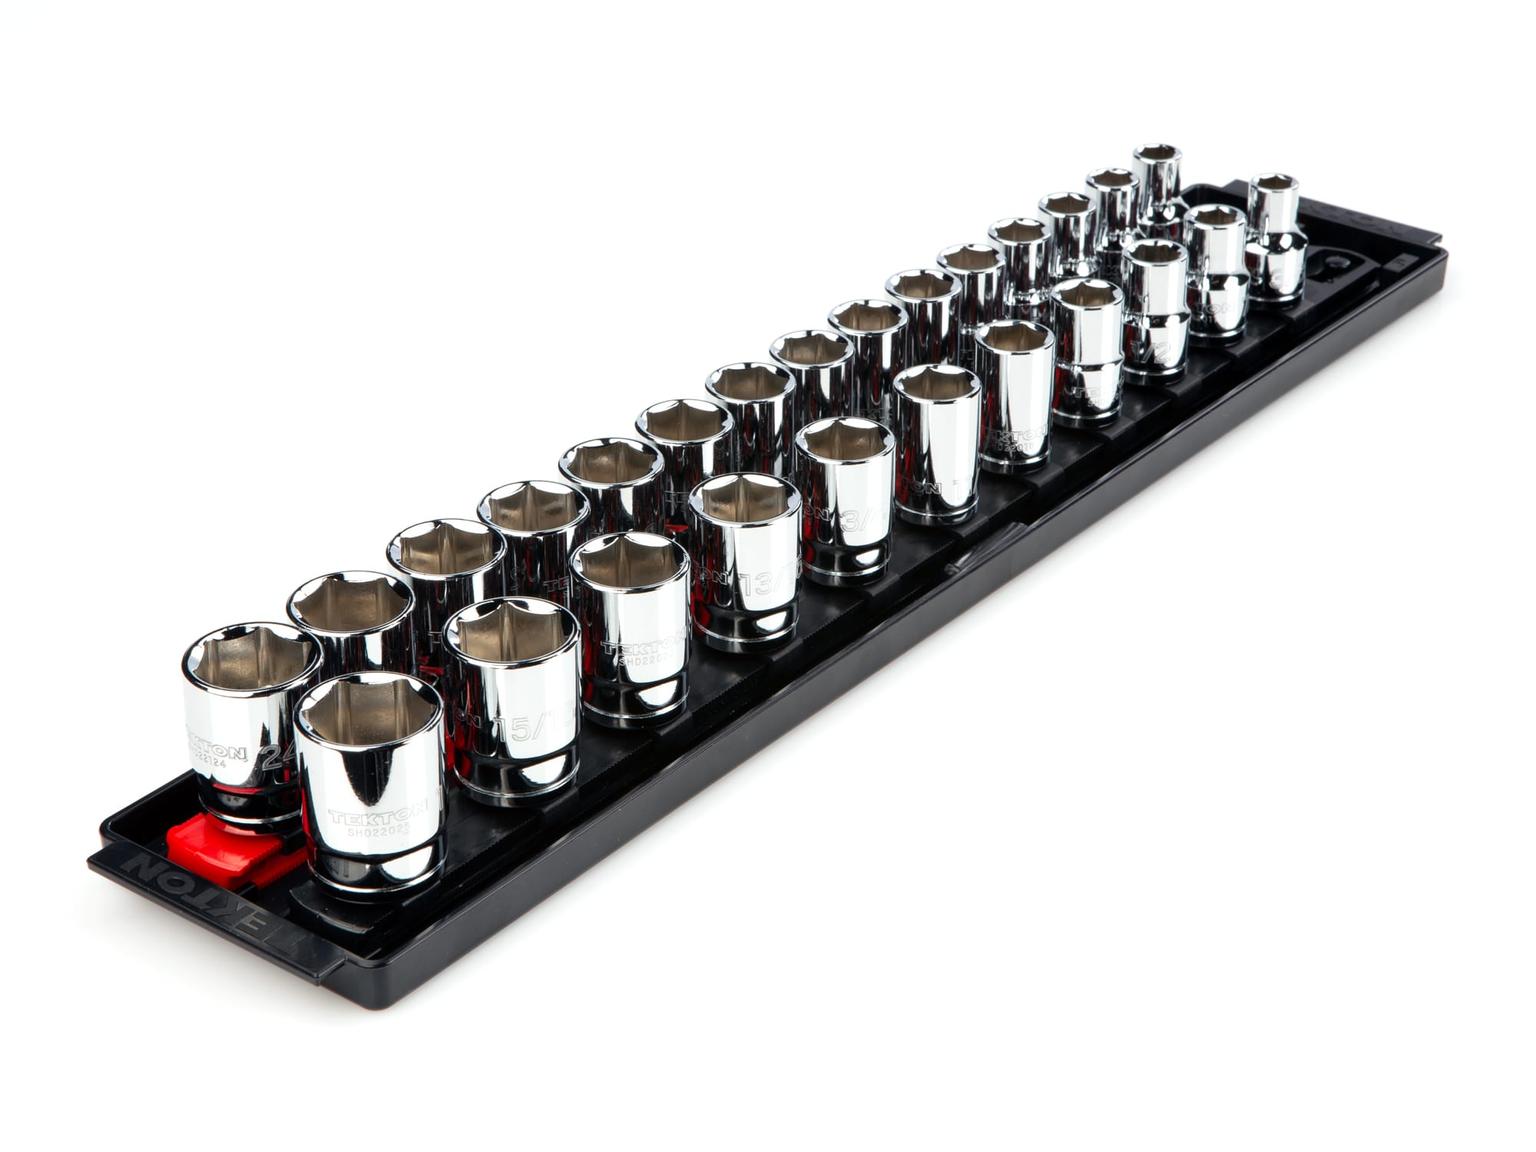 TEKTON SHD92201-T 1/2 Inch Drive 6-Point Socket Set, 26-Piece (3/8-1 in., 10-24 mm) with Rails